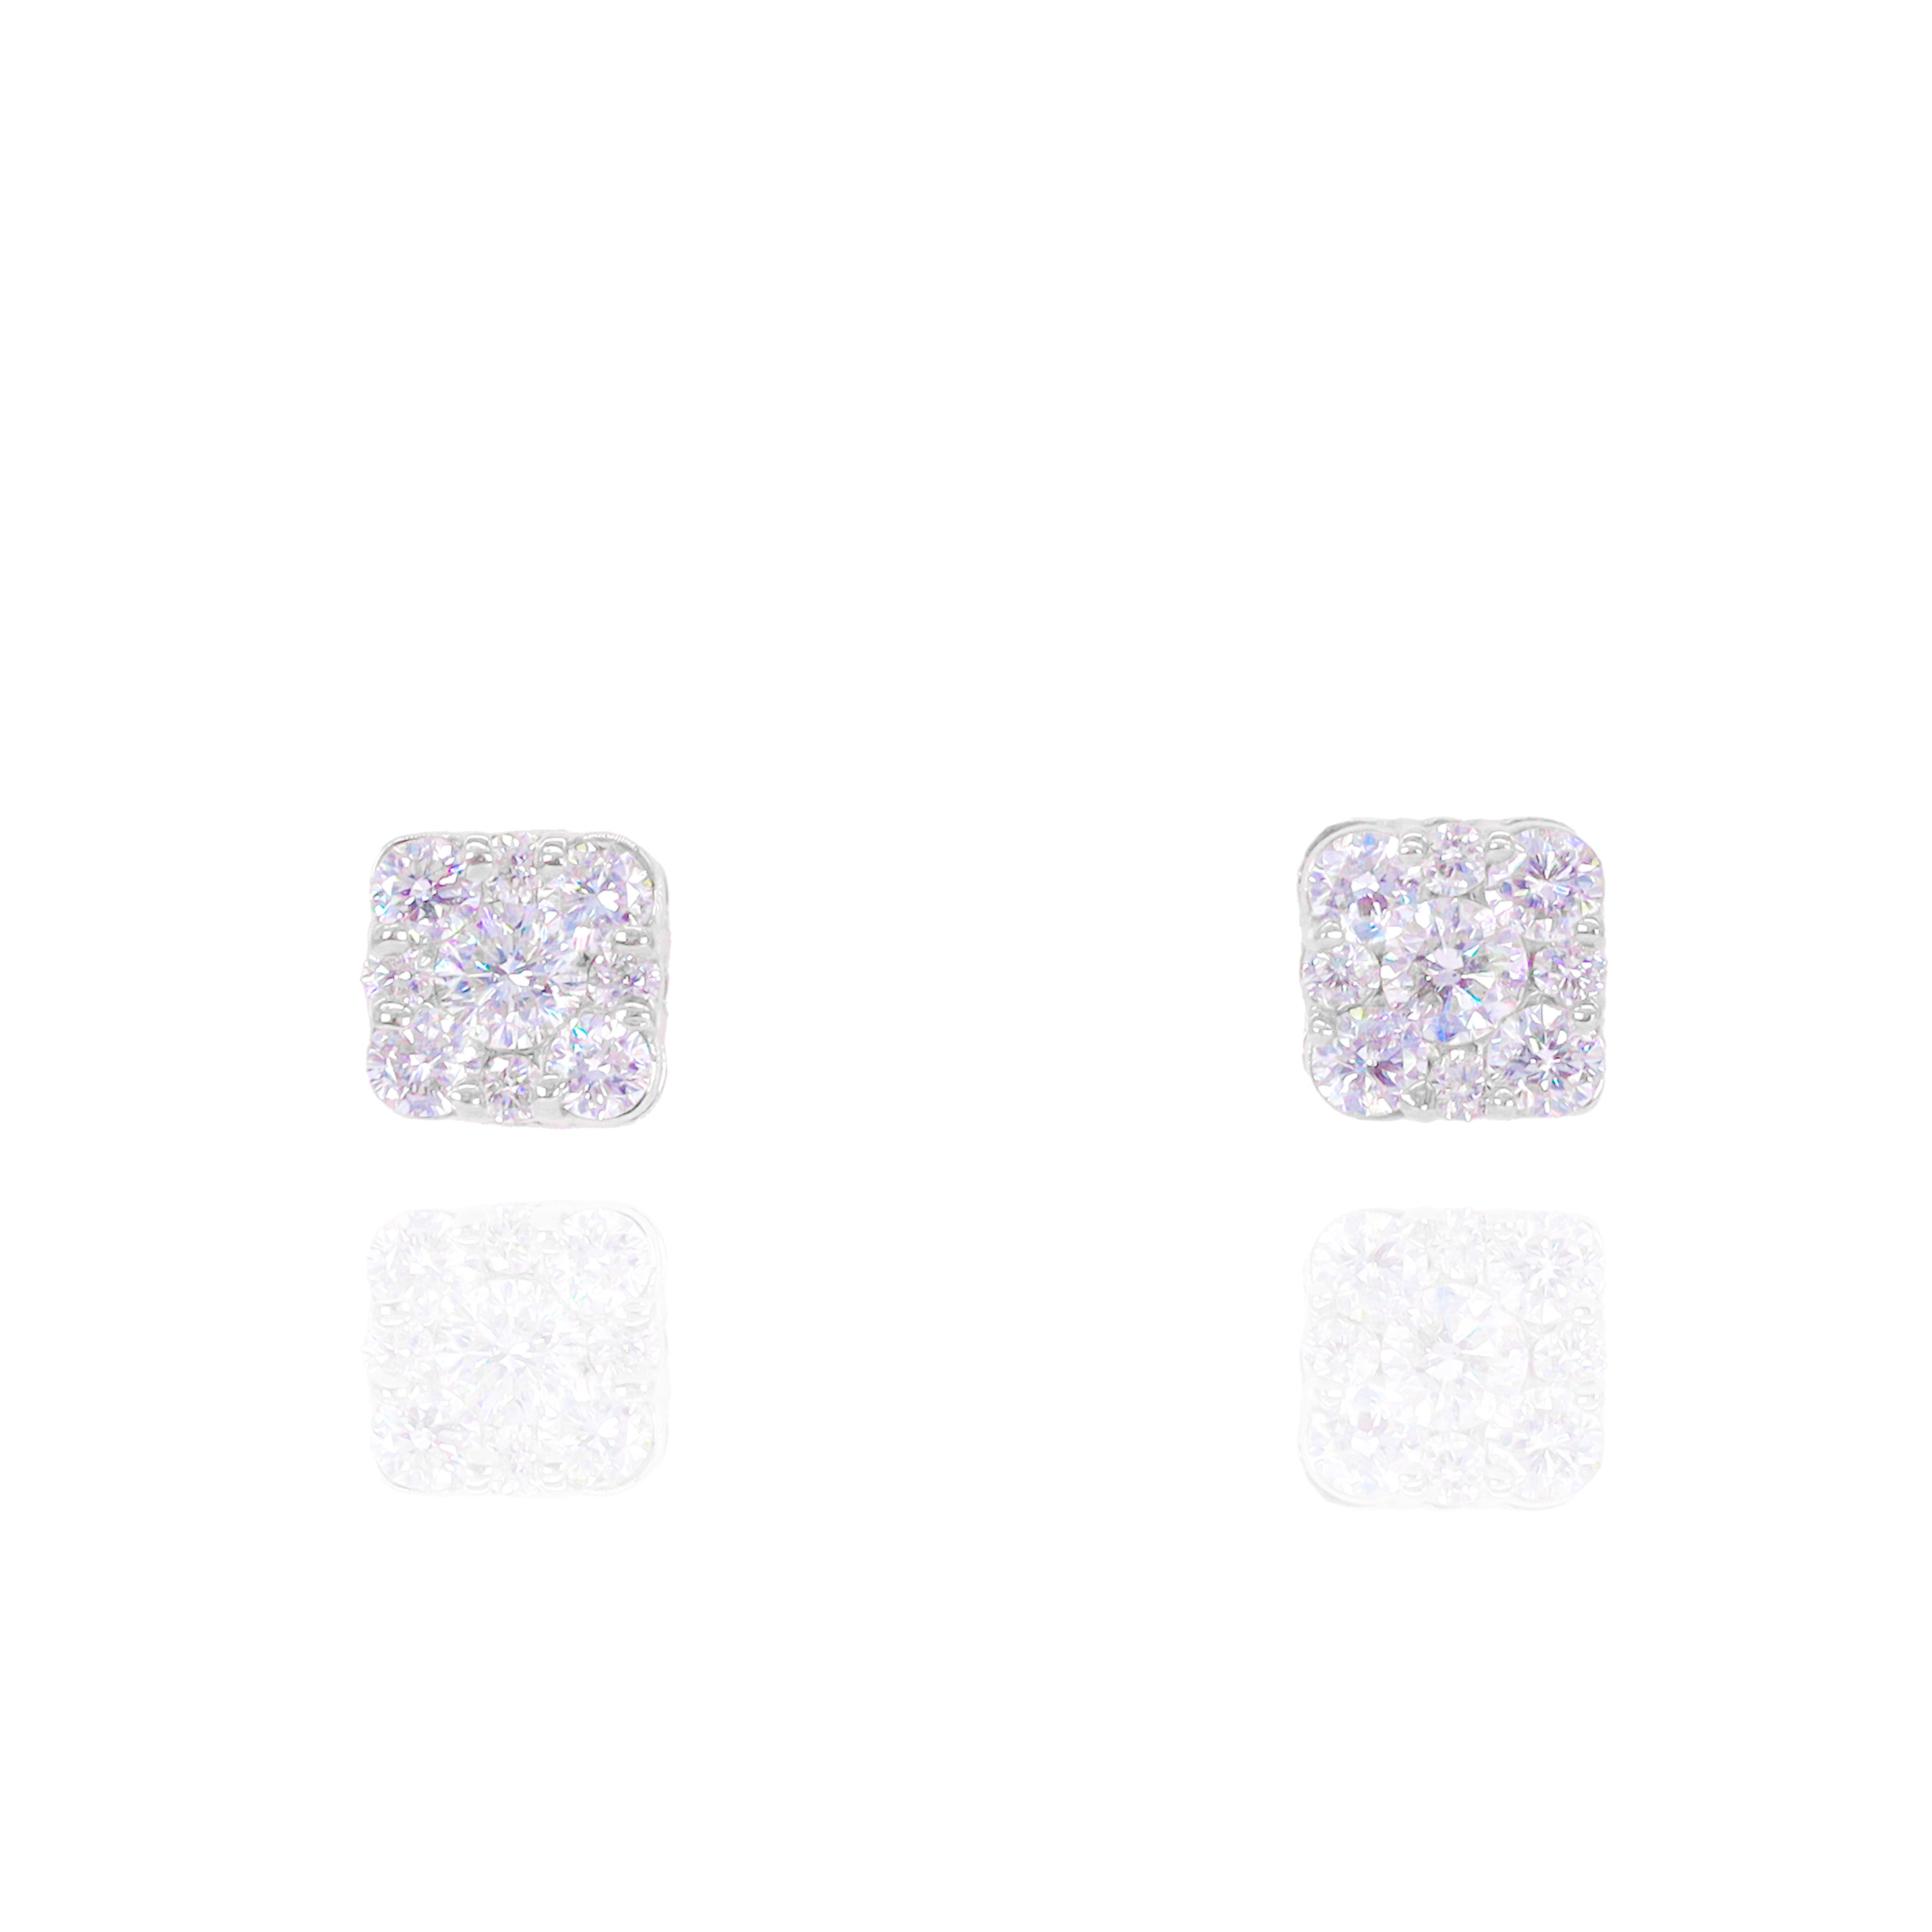 Square Solitaire Cluster Diamond Earrings